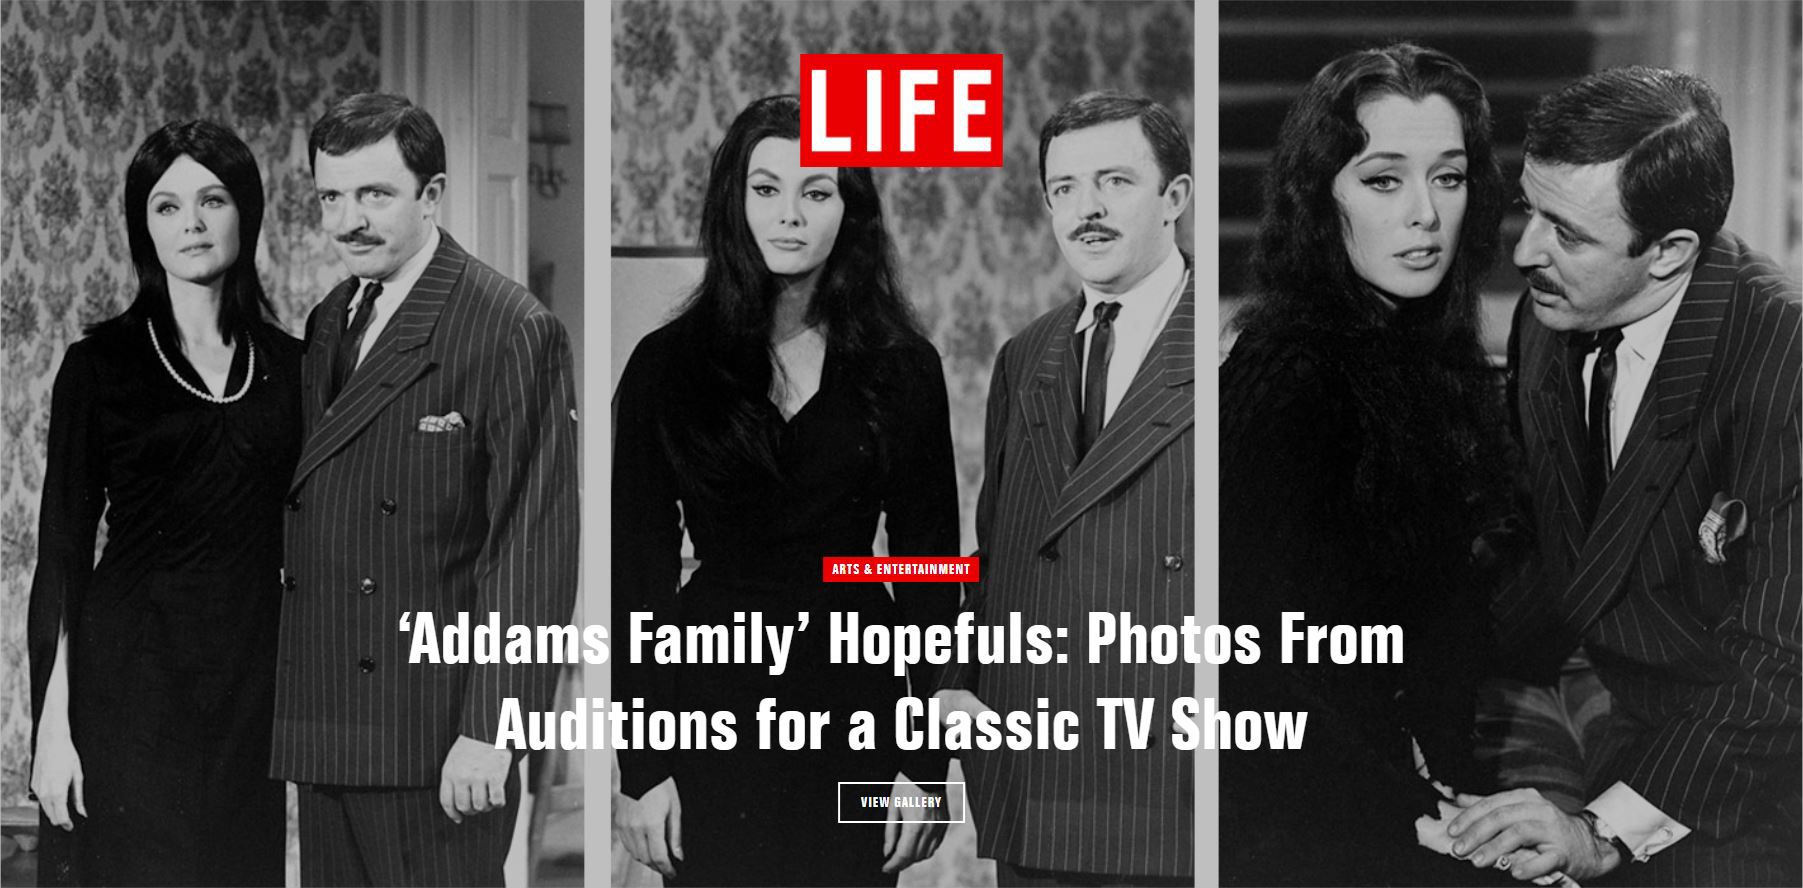 Life Magazine: ‘Addams Family’ Hopefuls: Photos From Auditions for a Classic TV Show